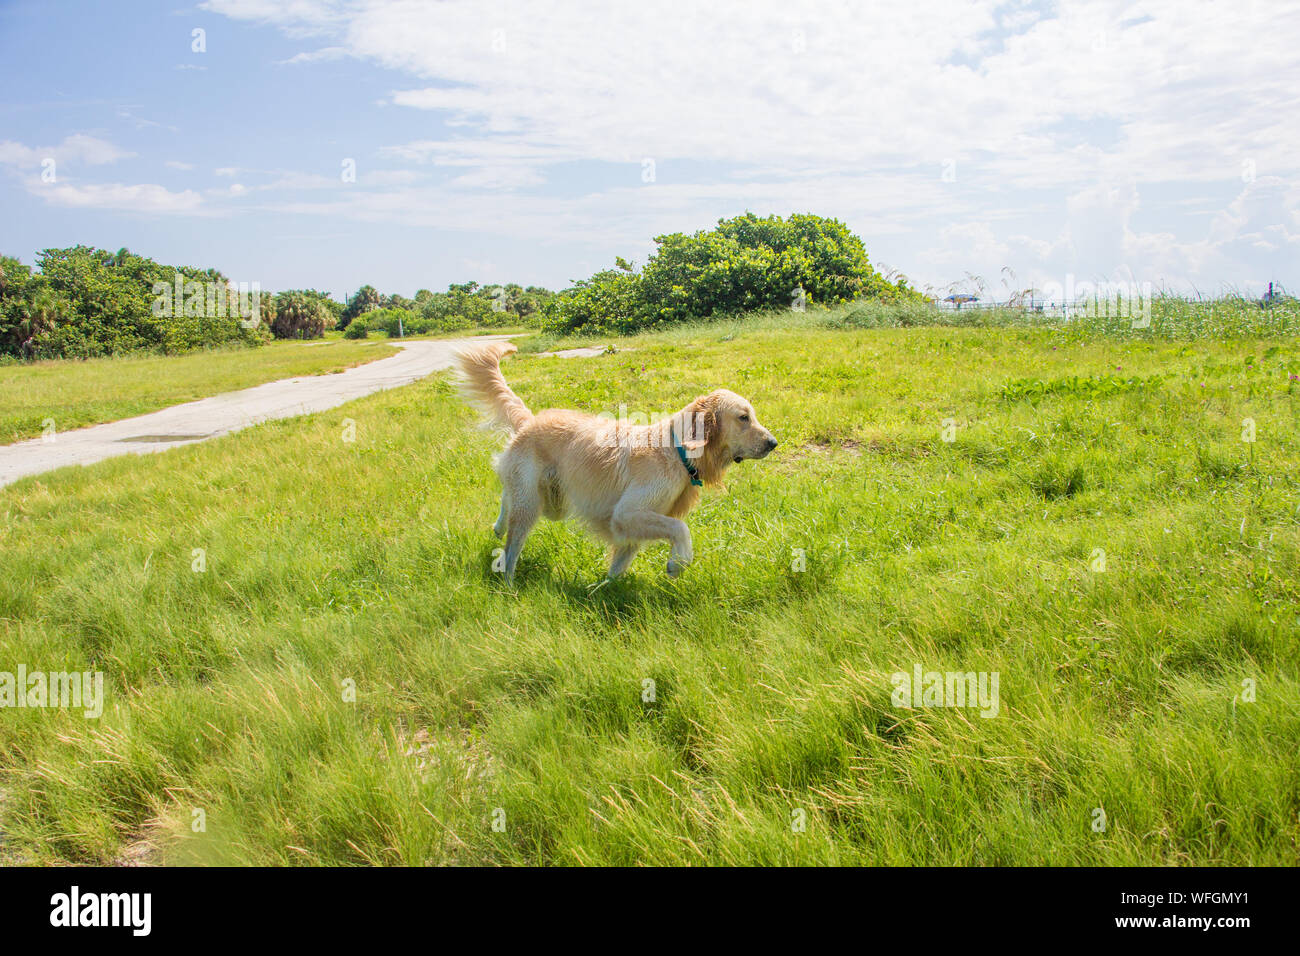 Golden retriever dog walking in a rural landscape, United States Stock Photo